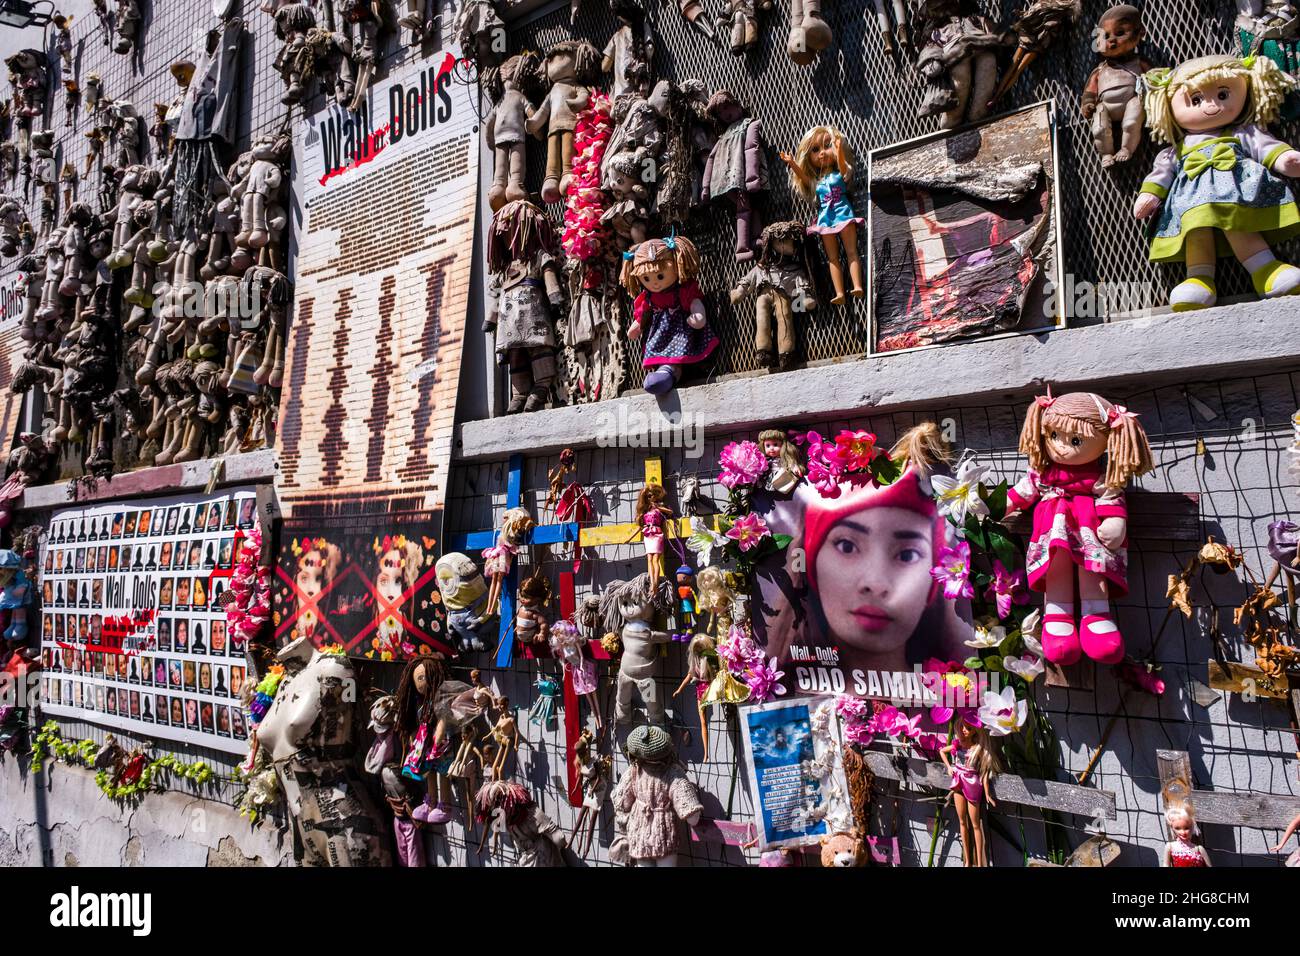 The Wall of the Dolls, il Muro delle Bambole, an art installation, that raises awareness of violence against women. Stock Photo